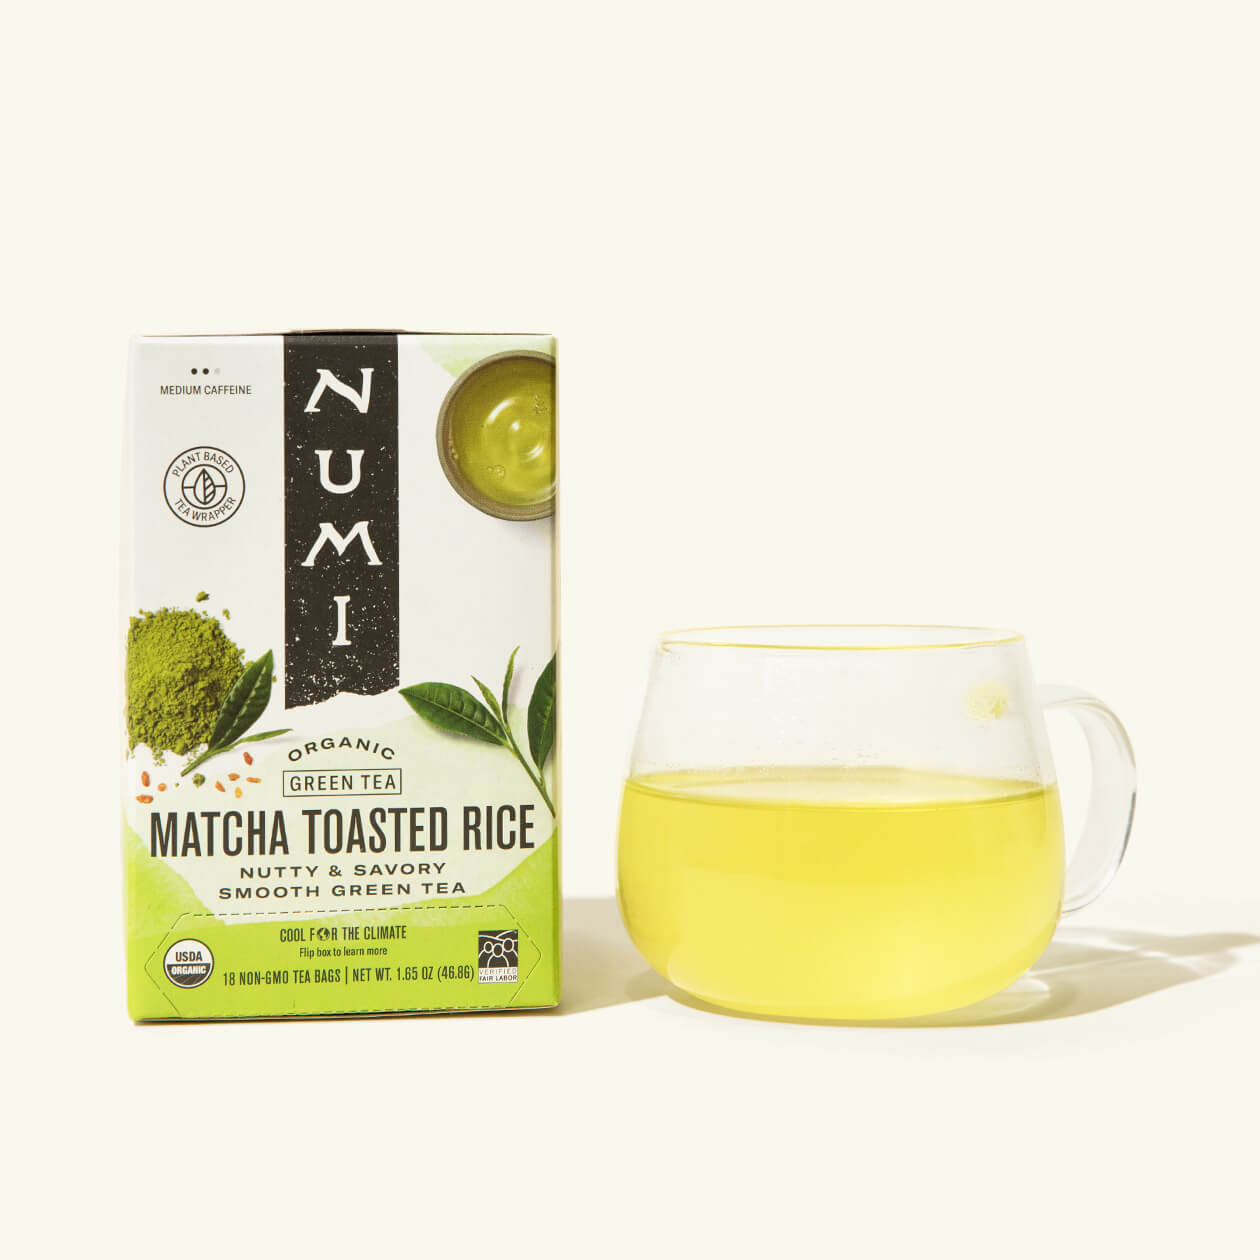 A box of Numi's Matcha Toasted Rice next to a brewed cup of tea in a clear cup